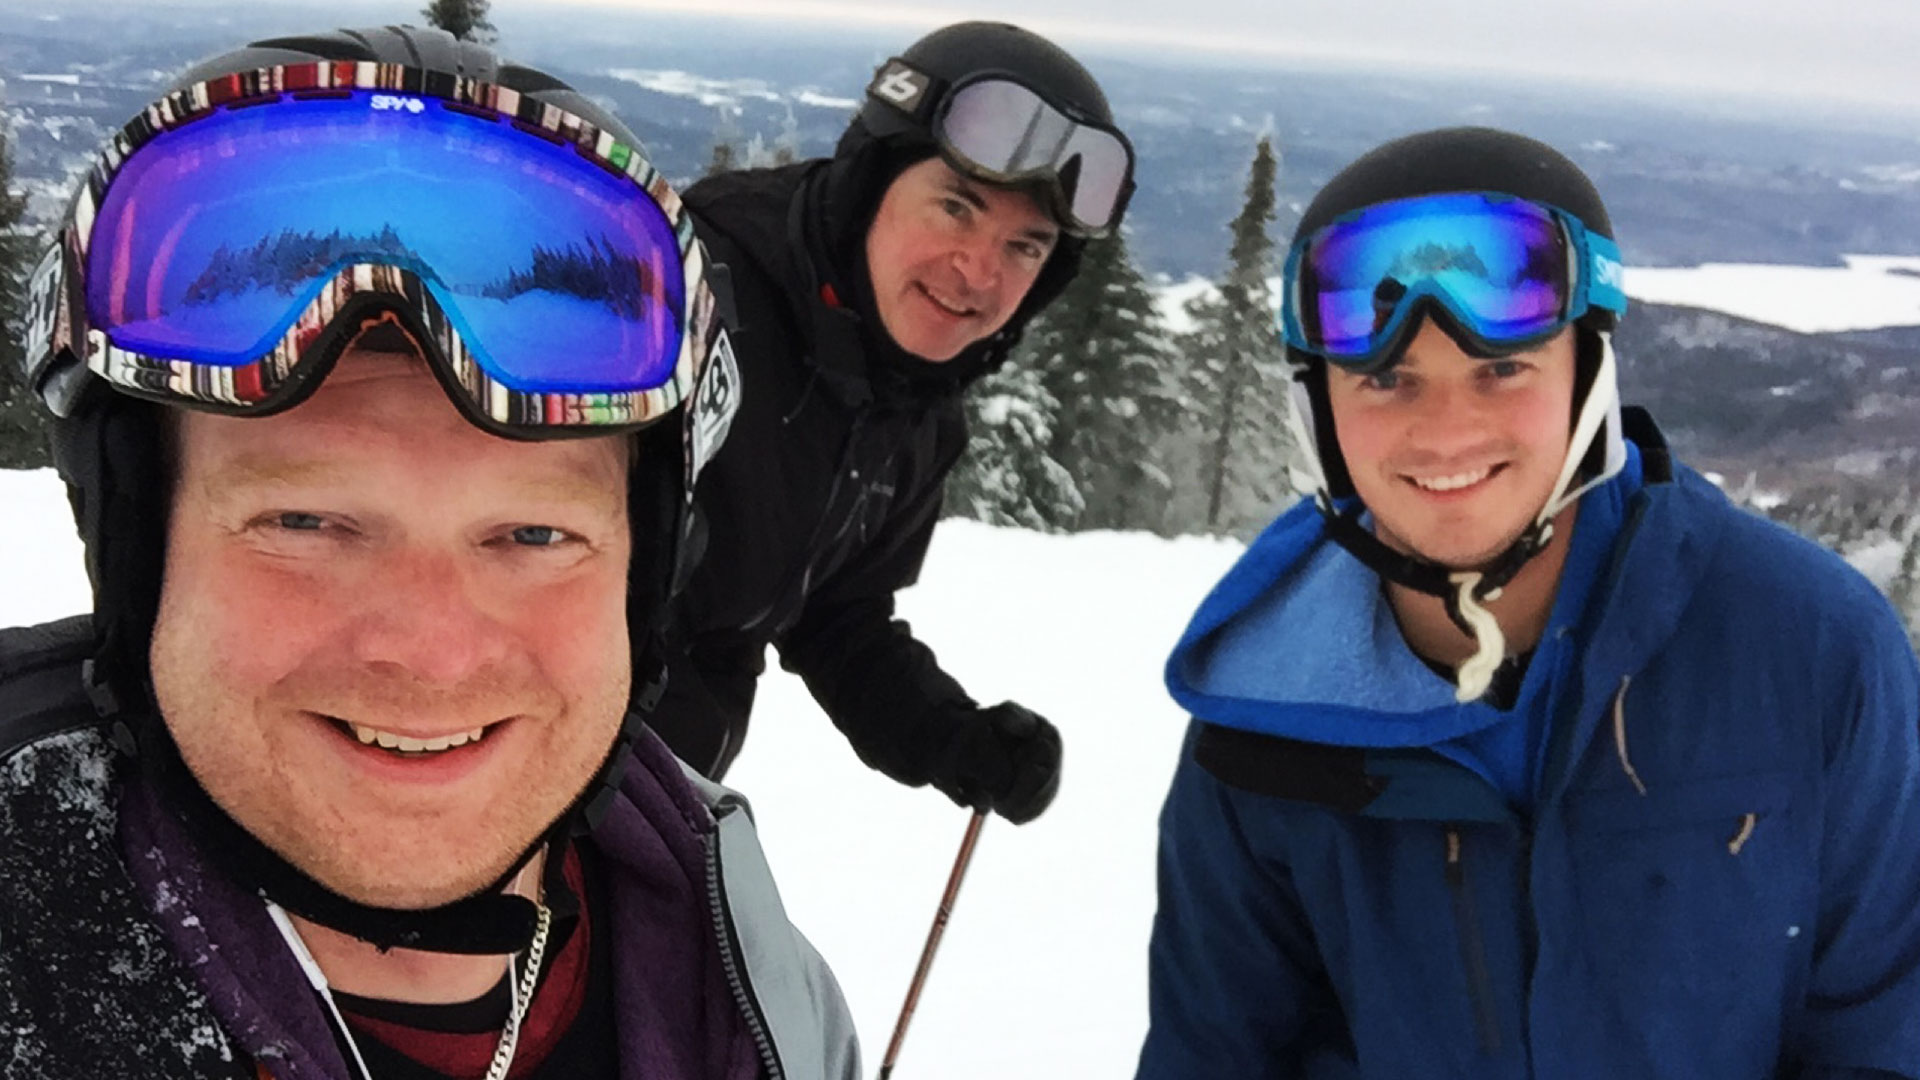 Me, Terry & Jay stop for a pic on the slopes at Tremblant